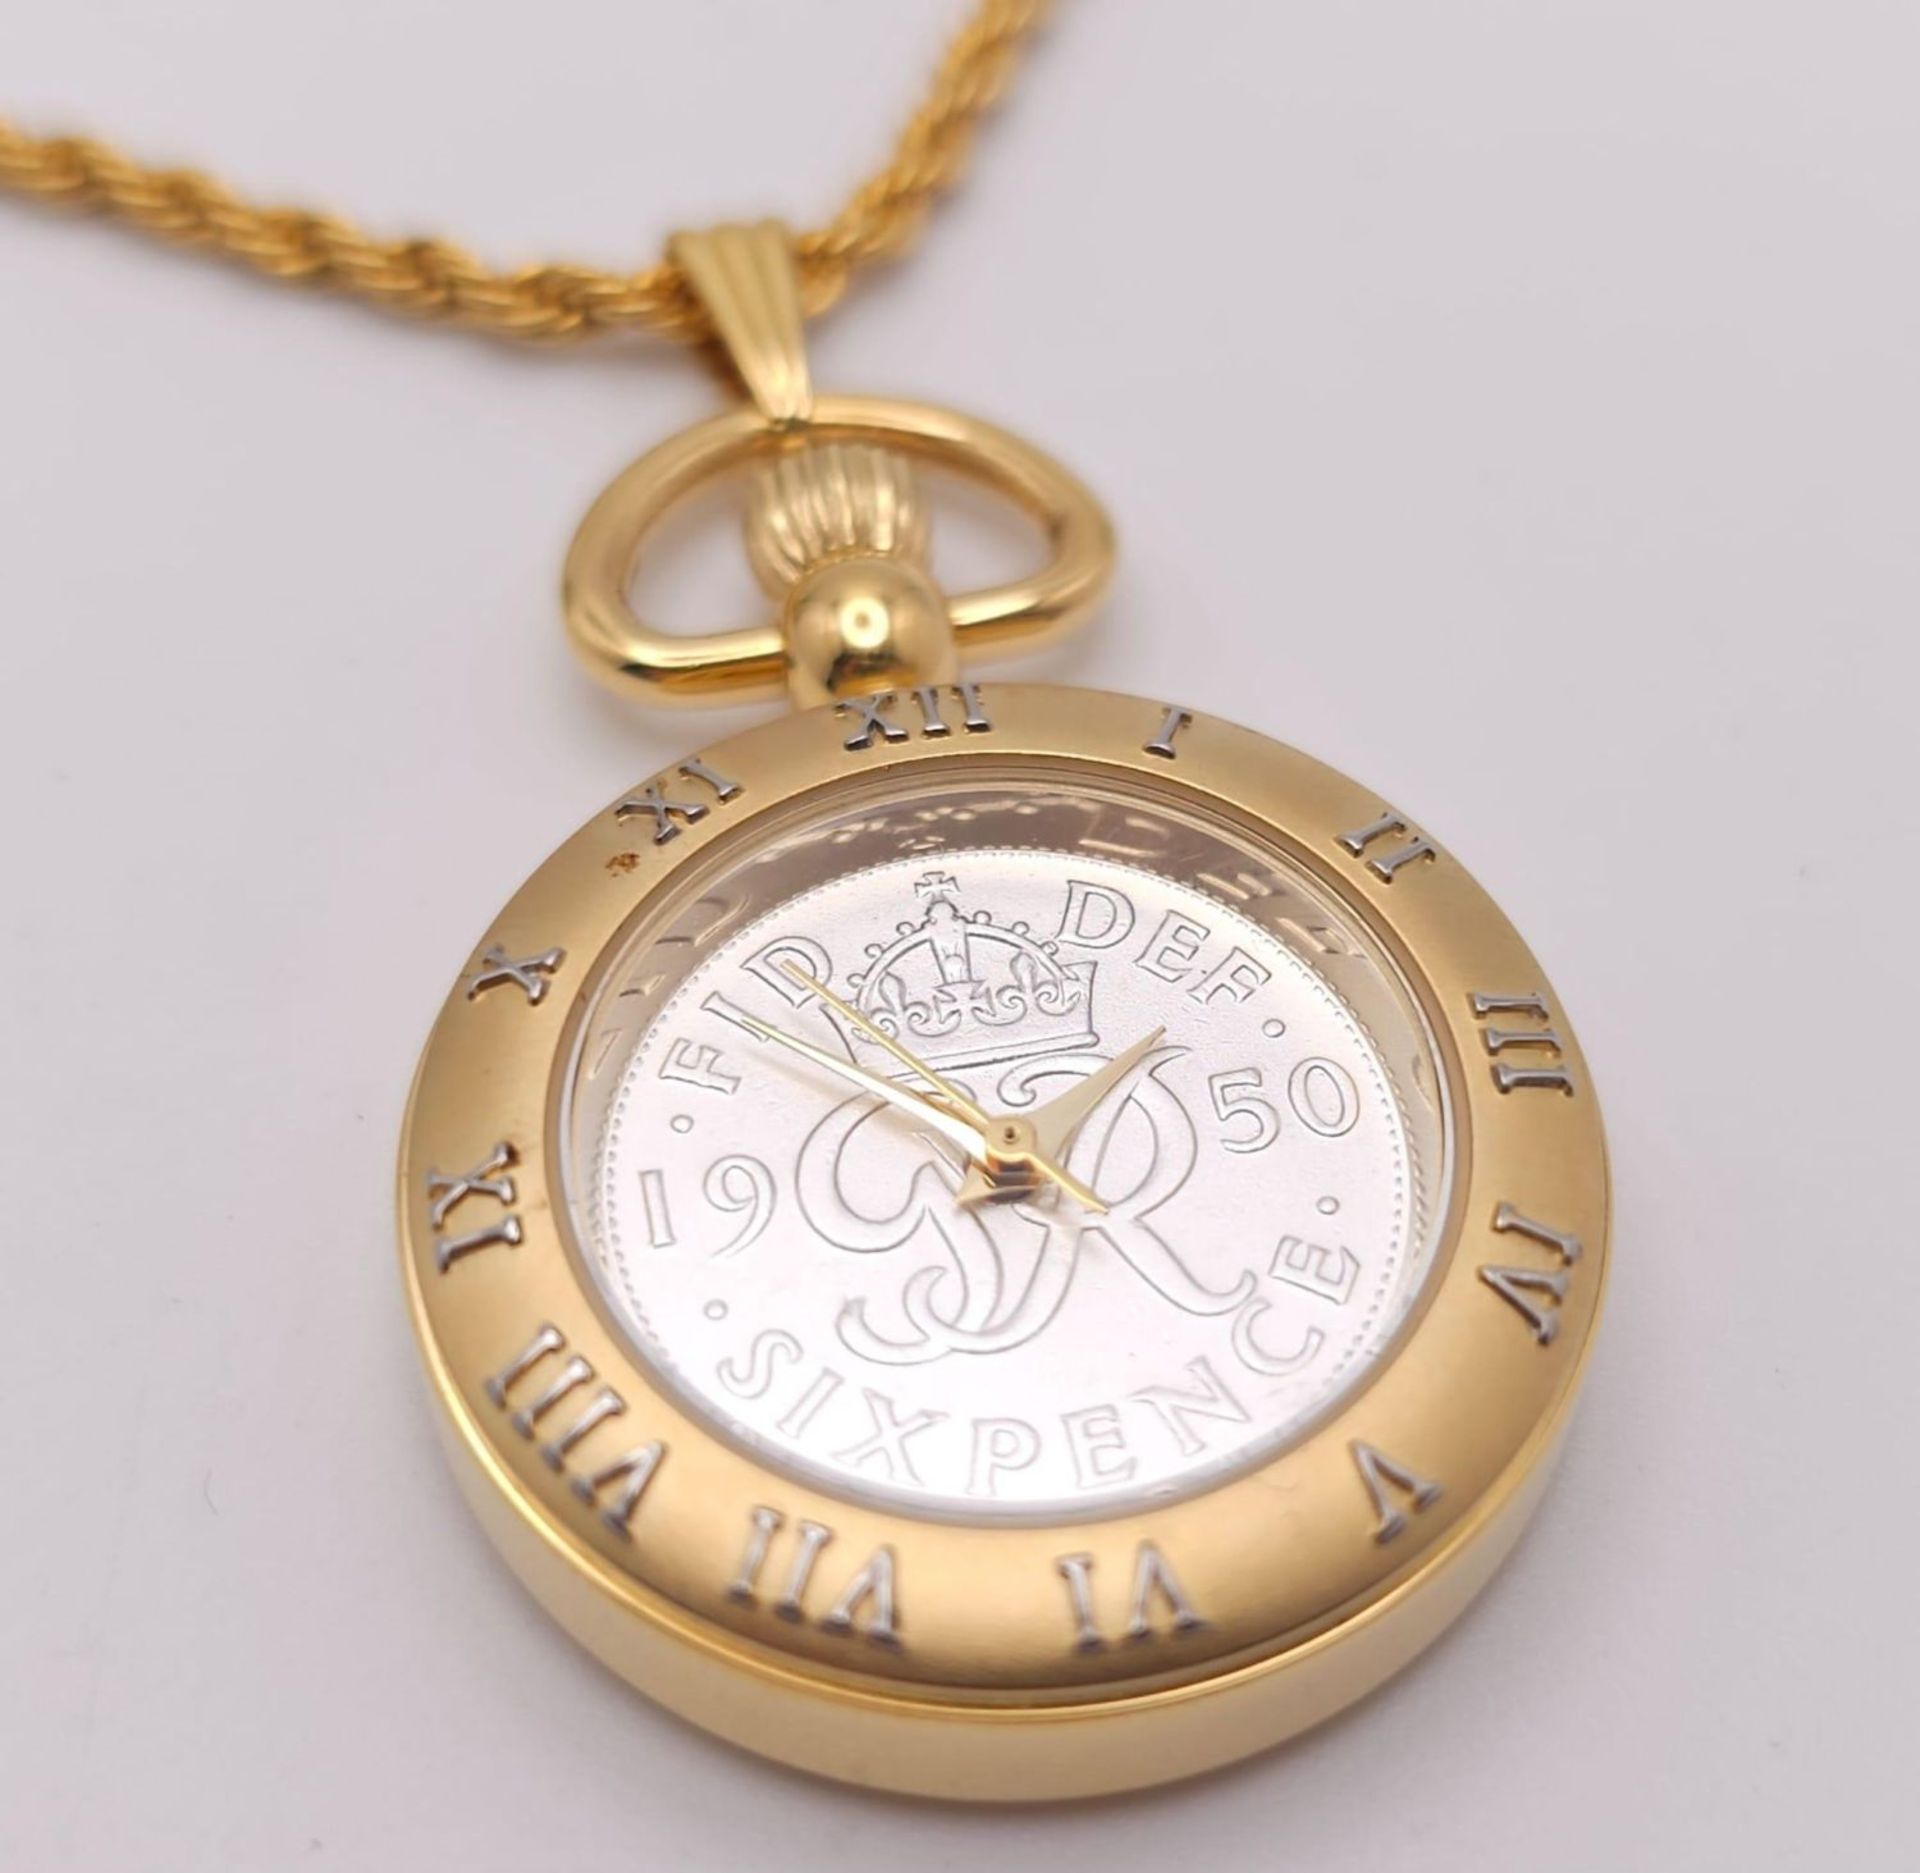 A BRAND NEW "COINWATCH" WITH 2 YEAR GUARANTEE . A PENDANT WATCH WITH A GENUINE COIN AS THE DIAL , - Bild 7 aus 18